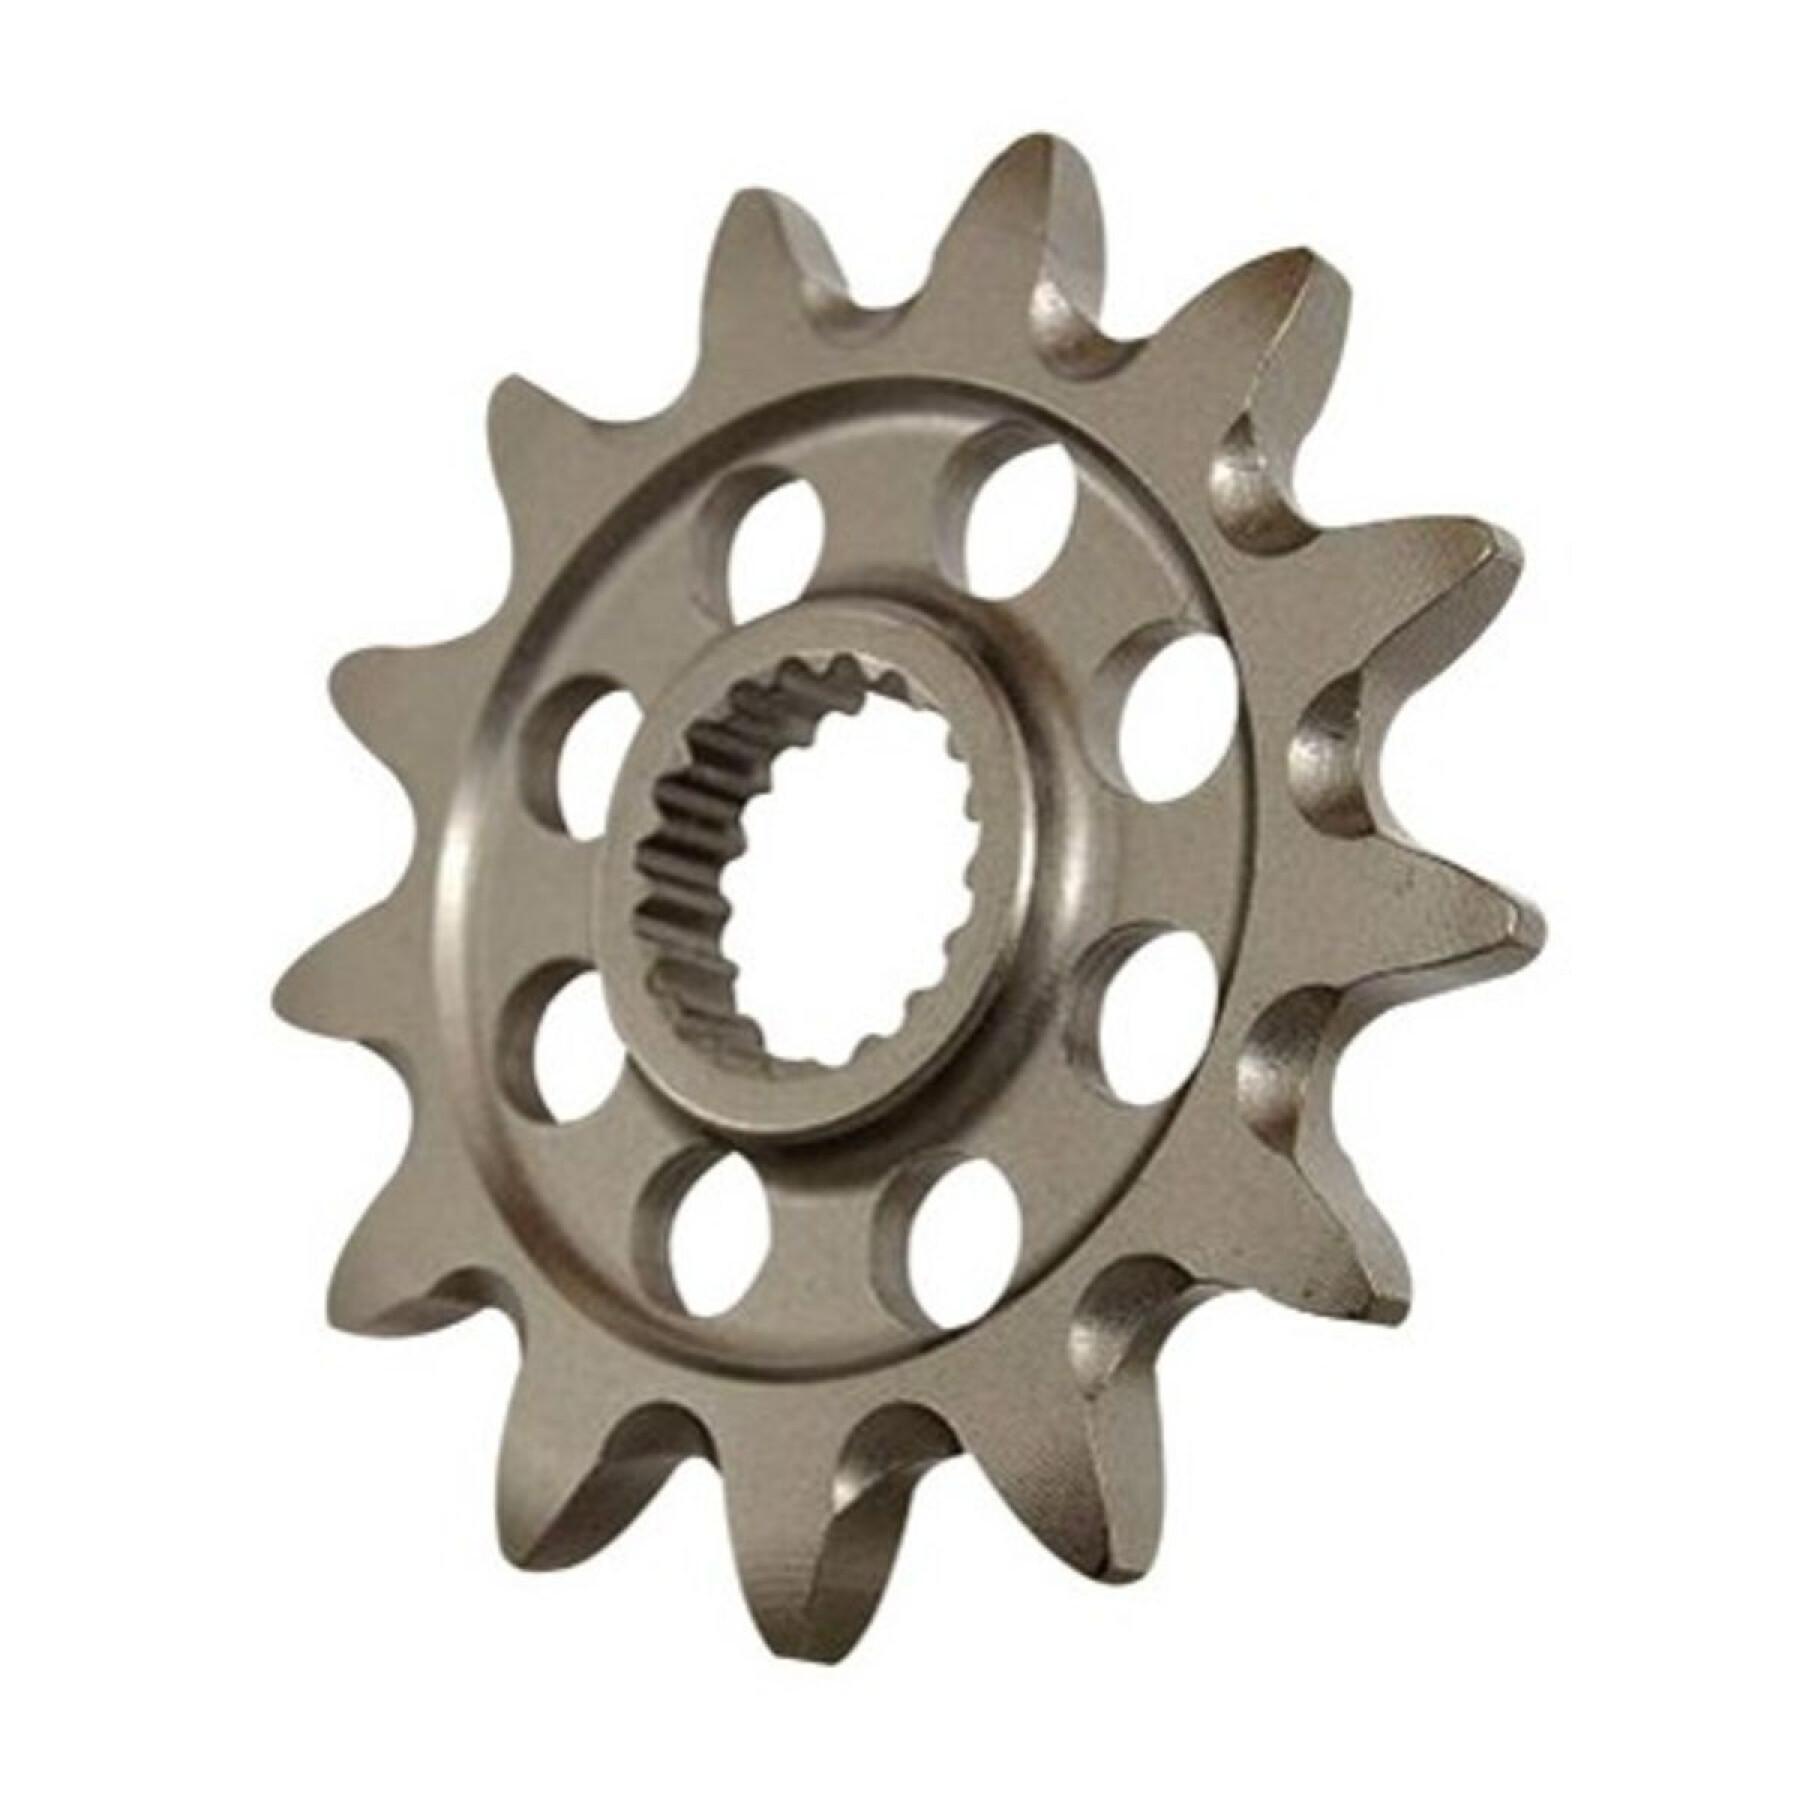 Motorcycle chain sprocket Supersprox PSB 50-35005-18 # JTF340.18